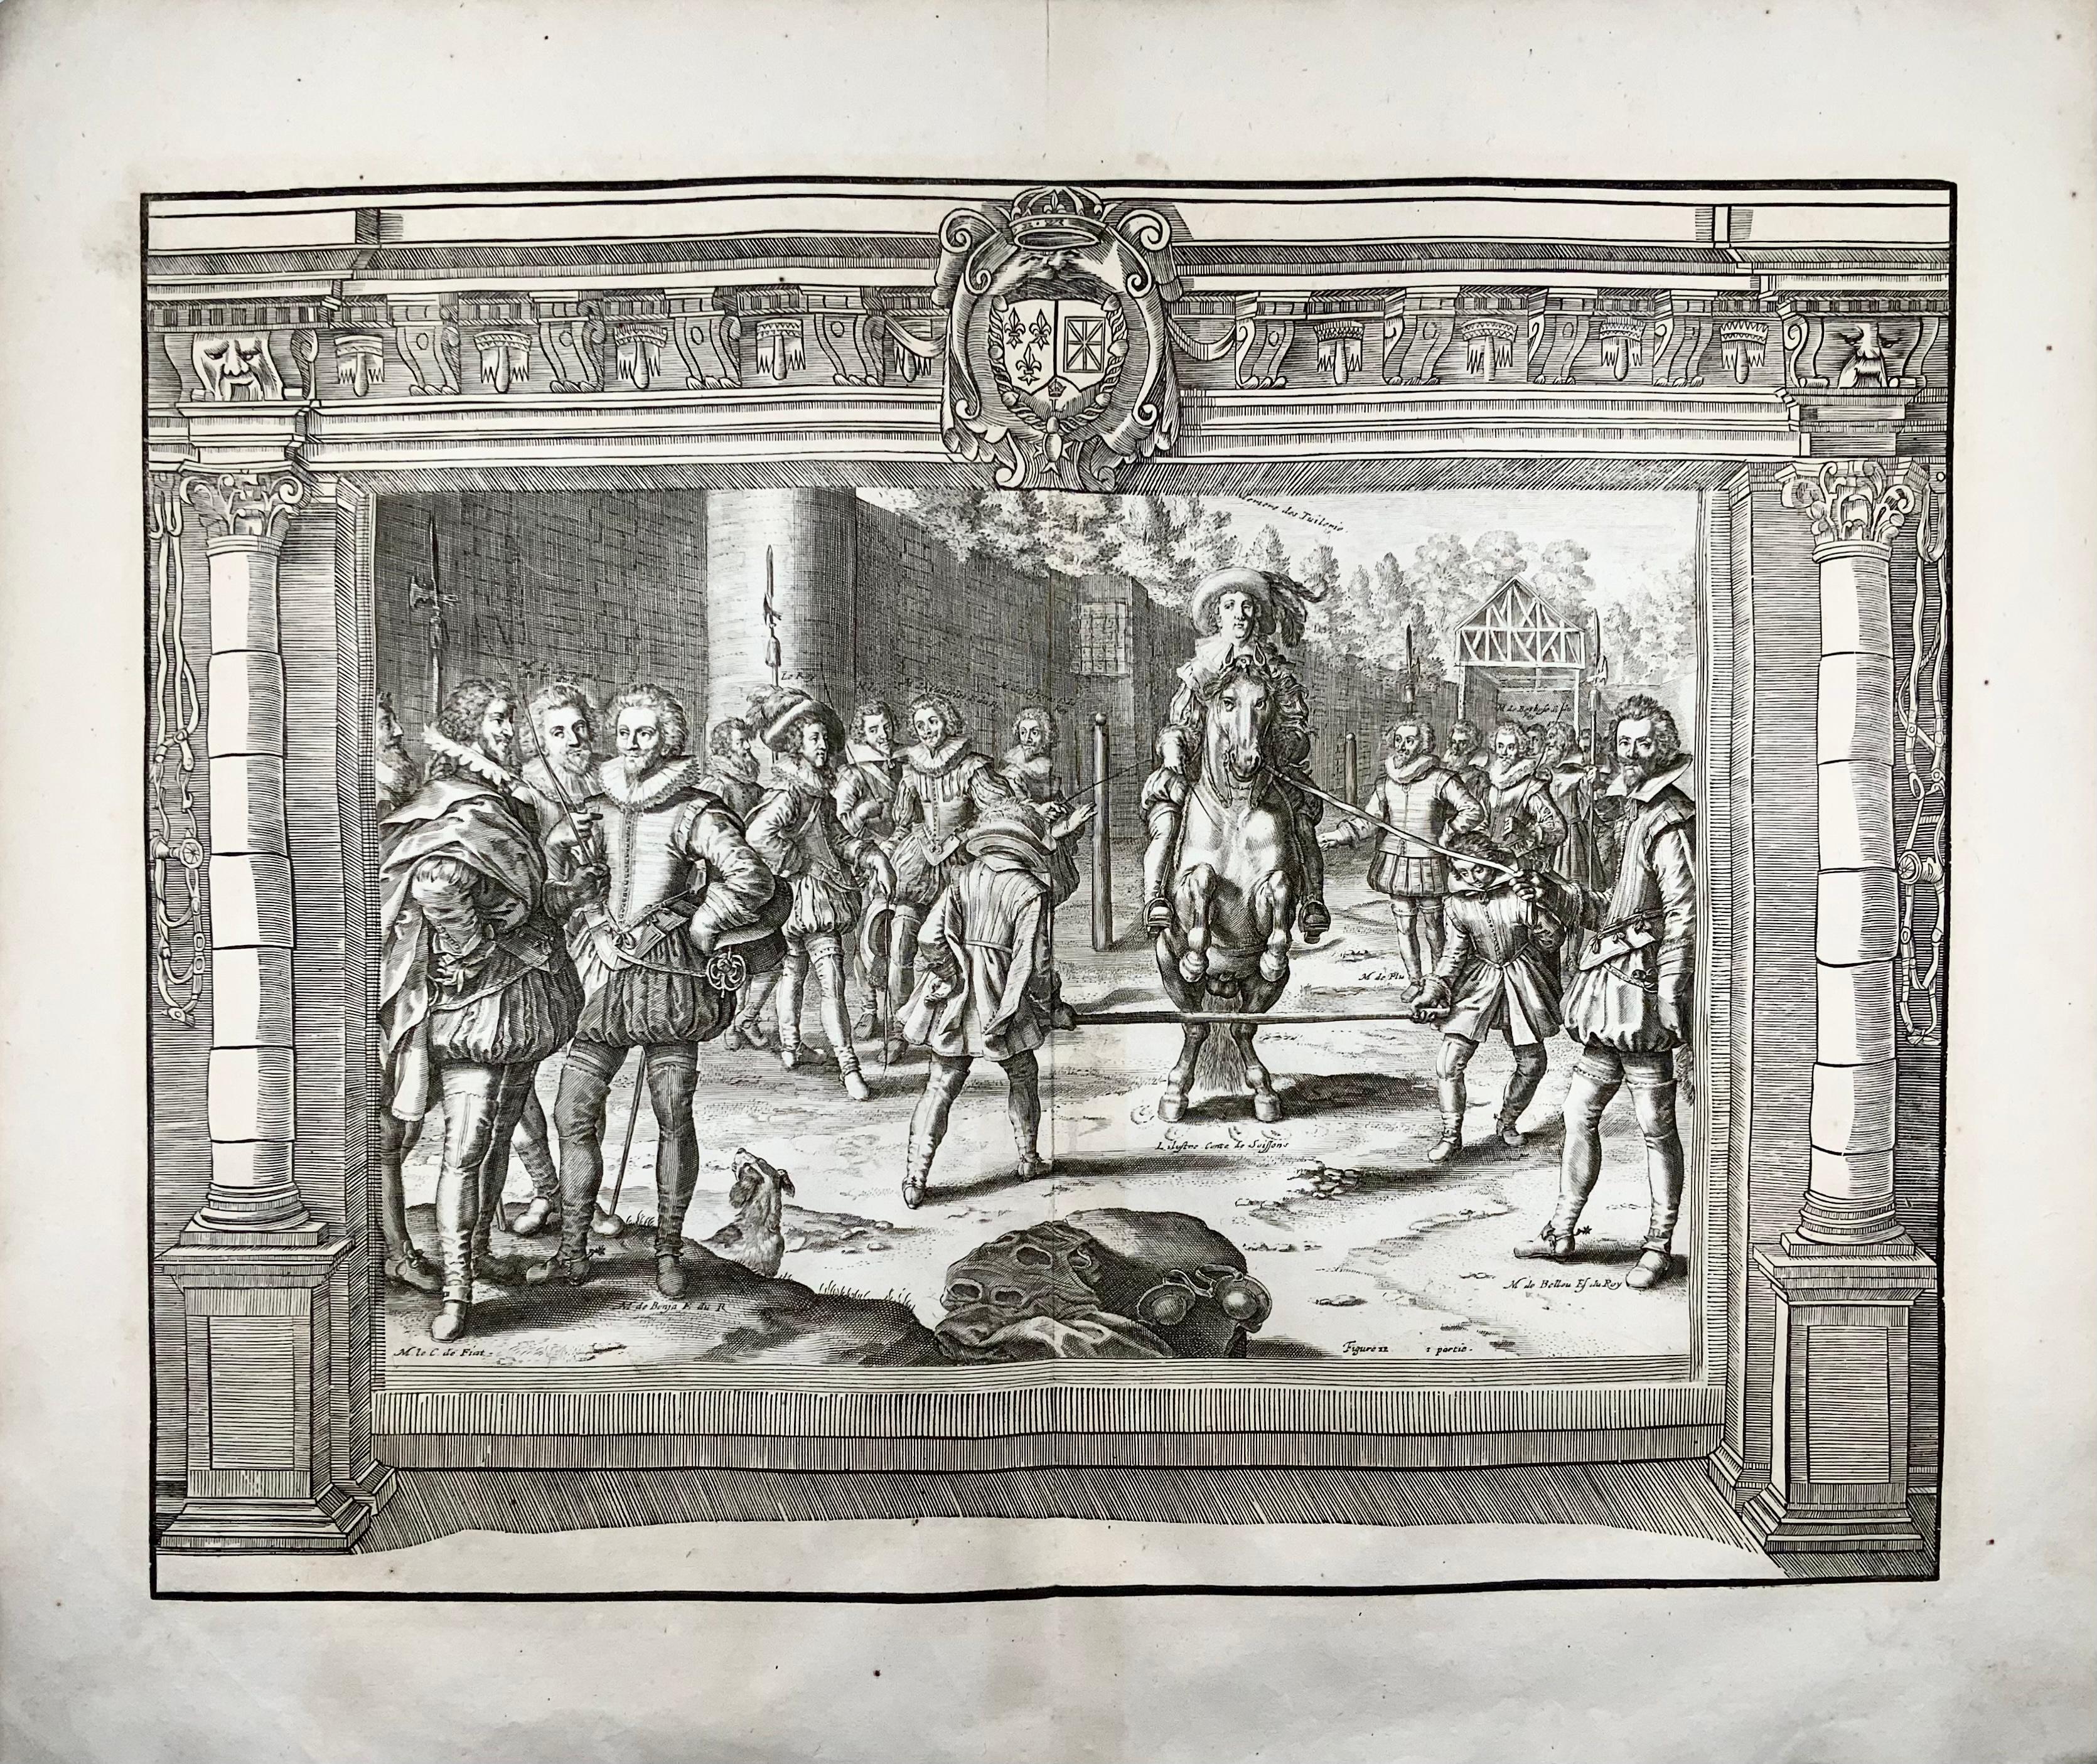 Sought after plate from the very decorative 1668 edition of Pluvinal's L'instruction du roy, en l'exercice de monter à cheval, Amsterdam 1668.

Engraved by Crispijn de Passe II from one of the classic works of the 17th century on dressage, riding,